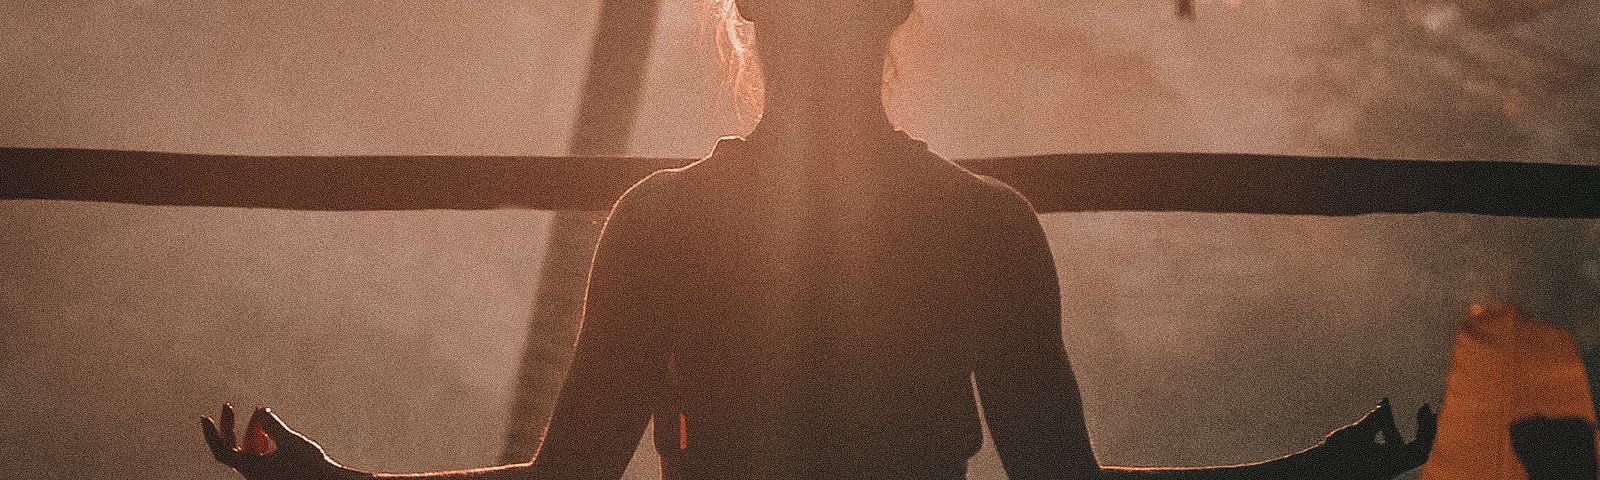 Person sitting in yoga position, in silhouette.